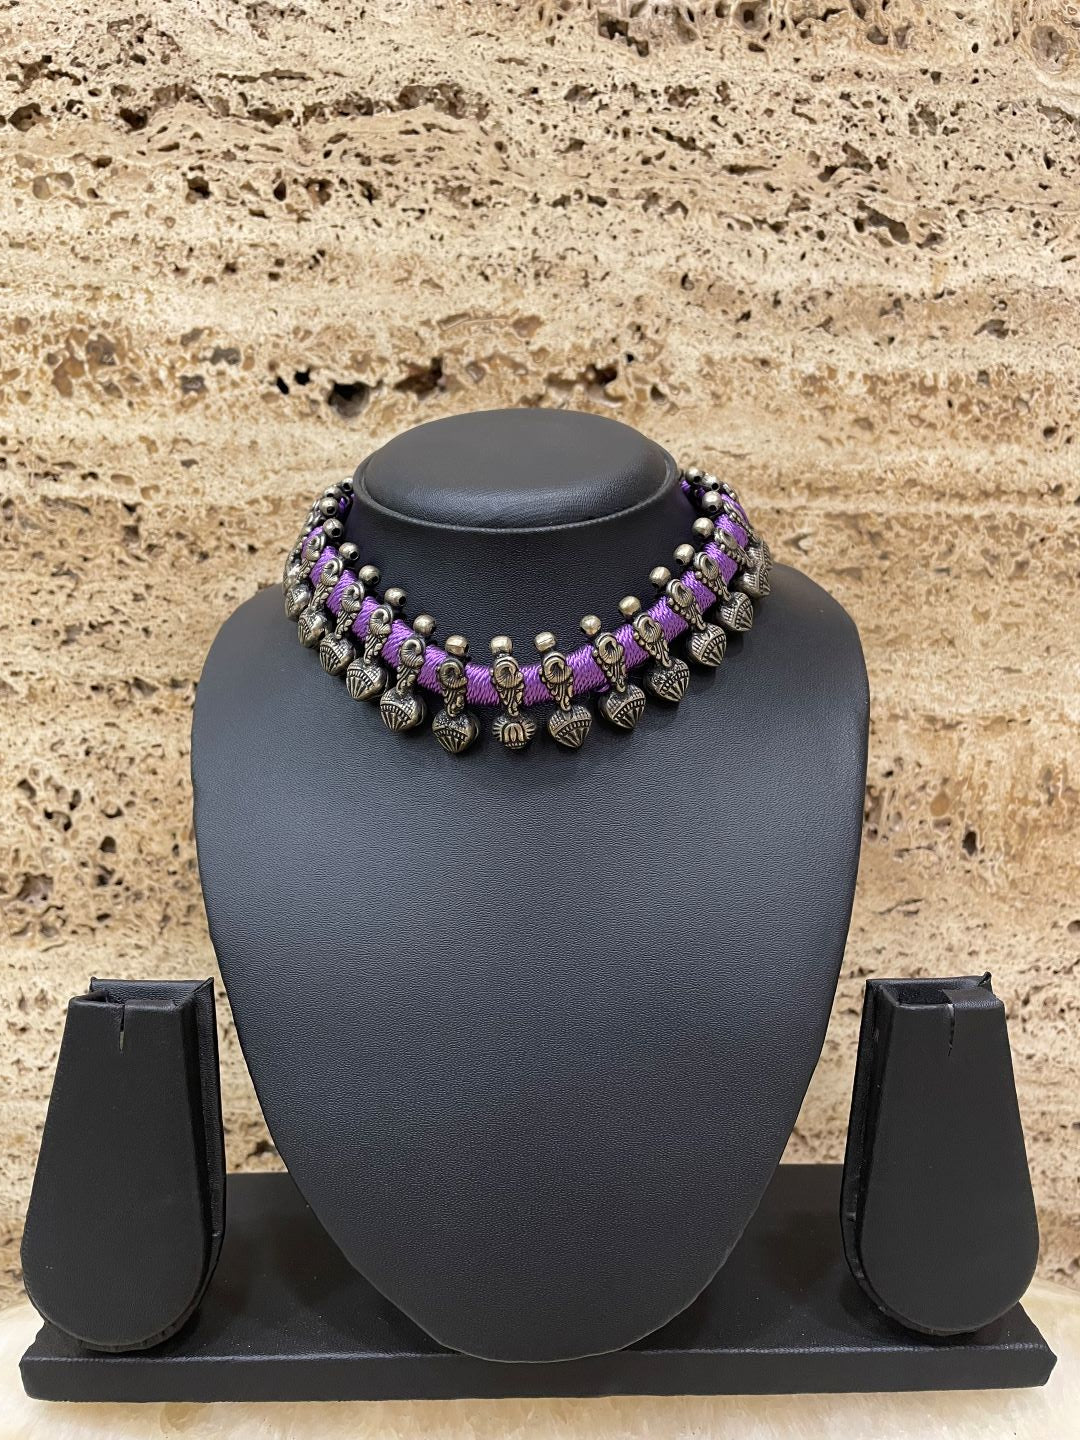 Bohemian Adjustable Oxidised Silver Choker Necklace Floral Pendents in Purple Cord